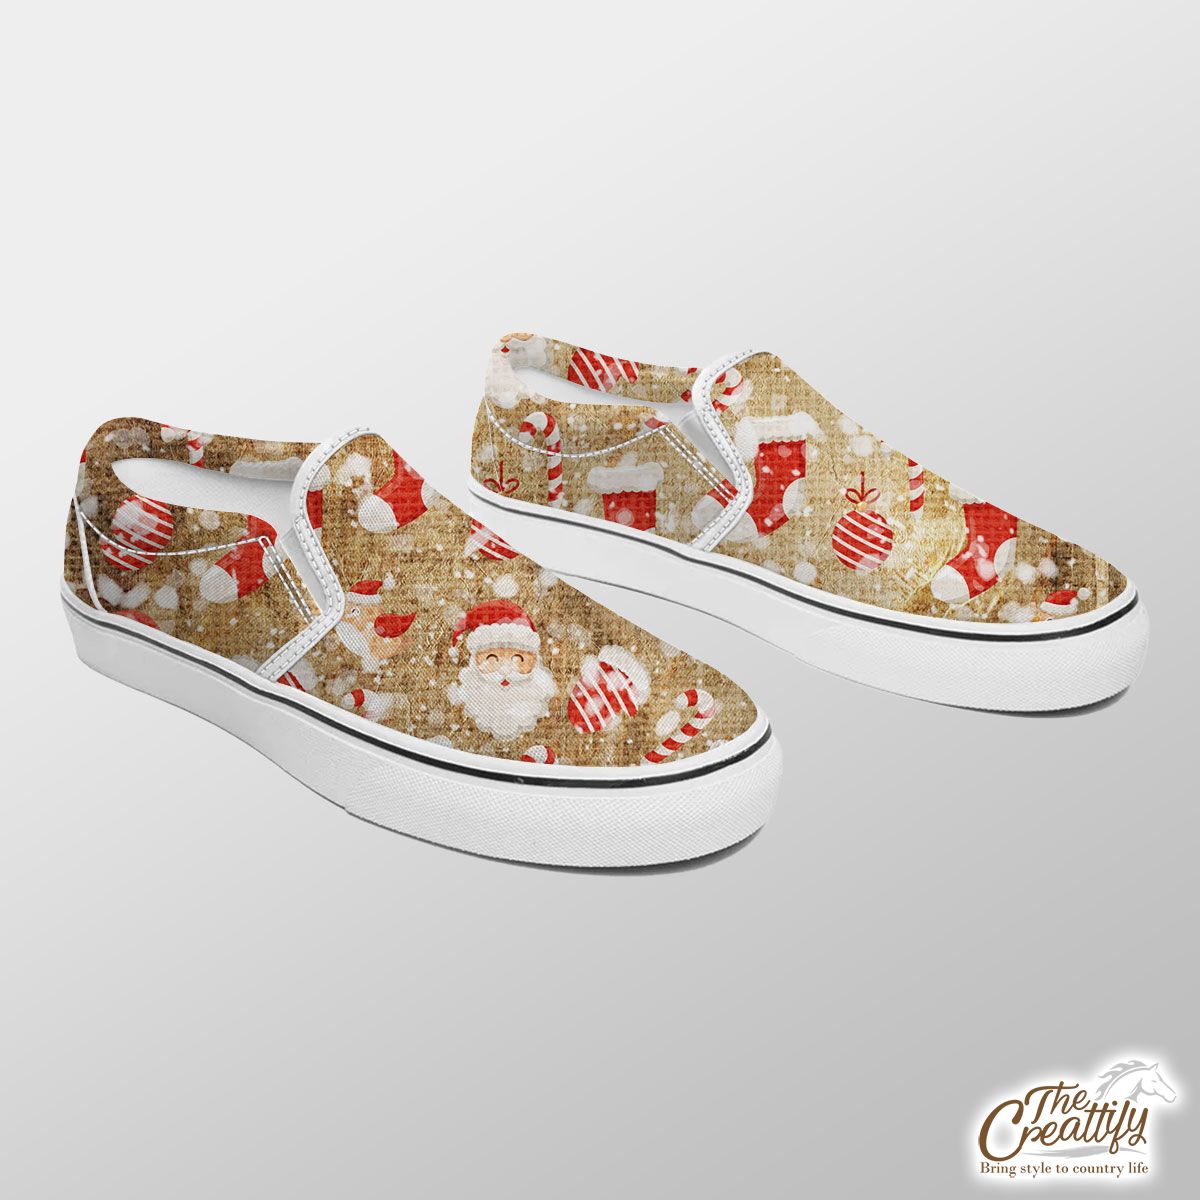 Santa Clause, Red Socks, Candy Canes And Cardinal Bird On Snowflake Slip On Sneakers